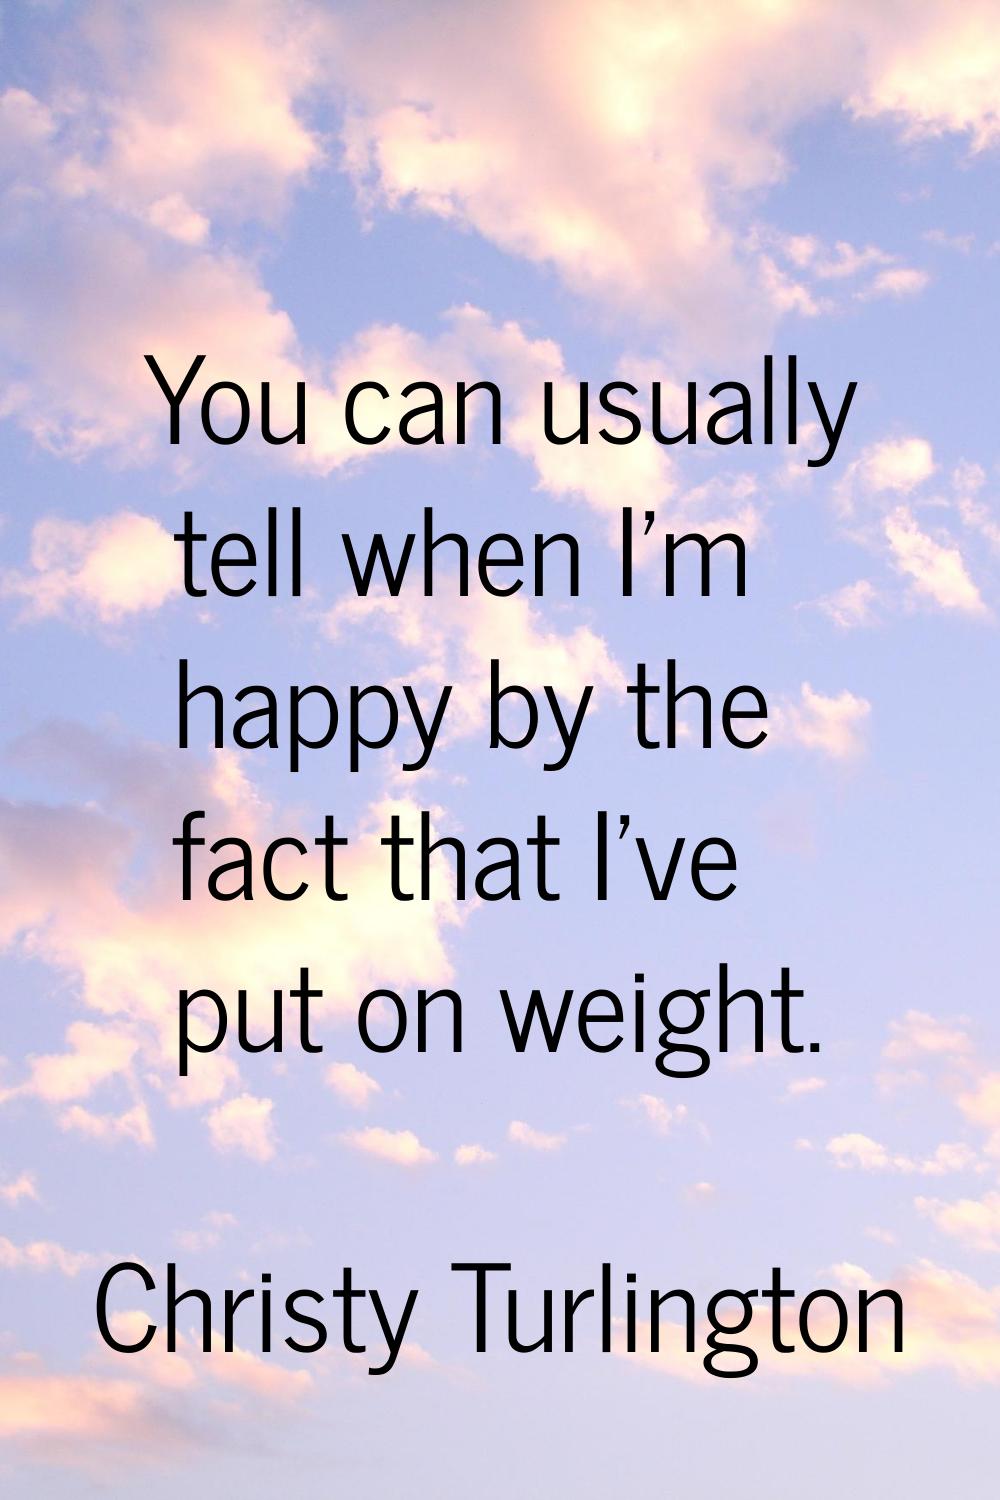 You can usually tell when I'm happy by the fact that I've put on weight.